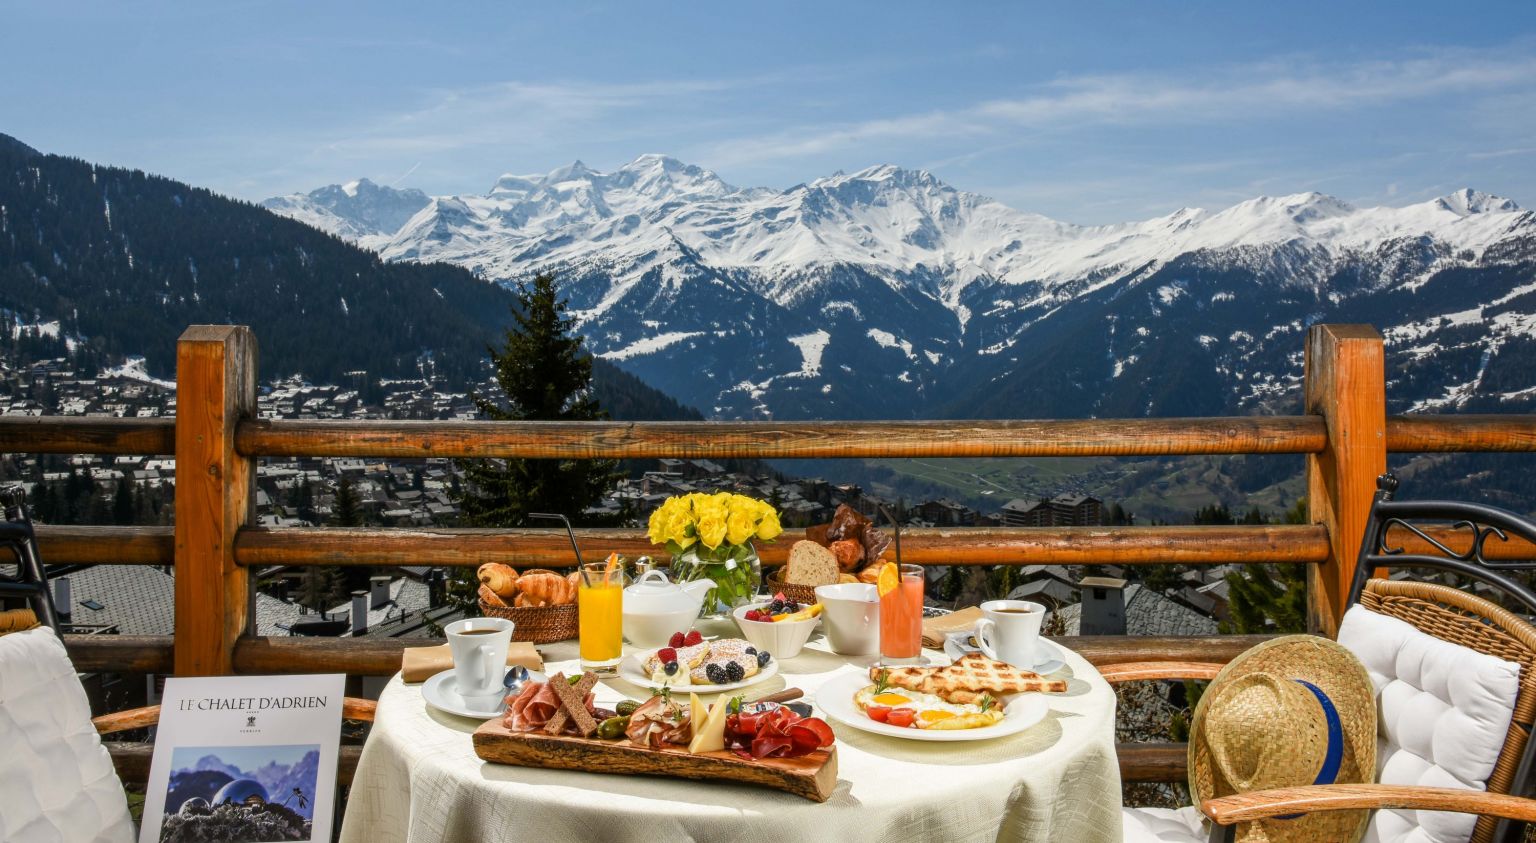 Brunch at the Chalet d'Adrien in Verbier on the terrace with a magnificent view of the mountains. Valais Switzerland